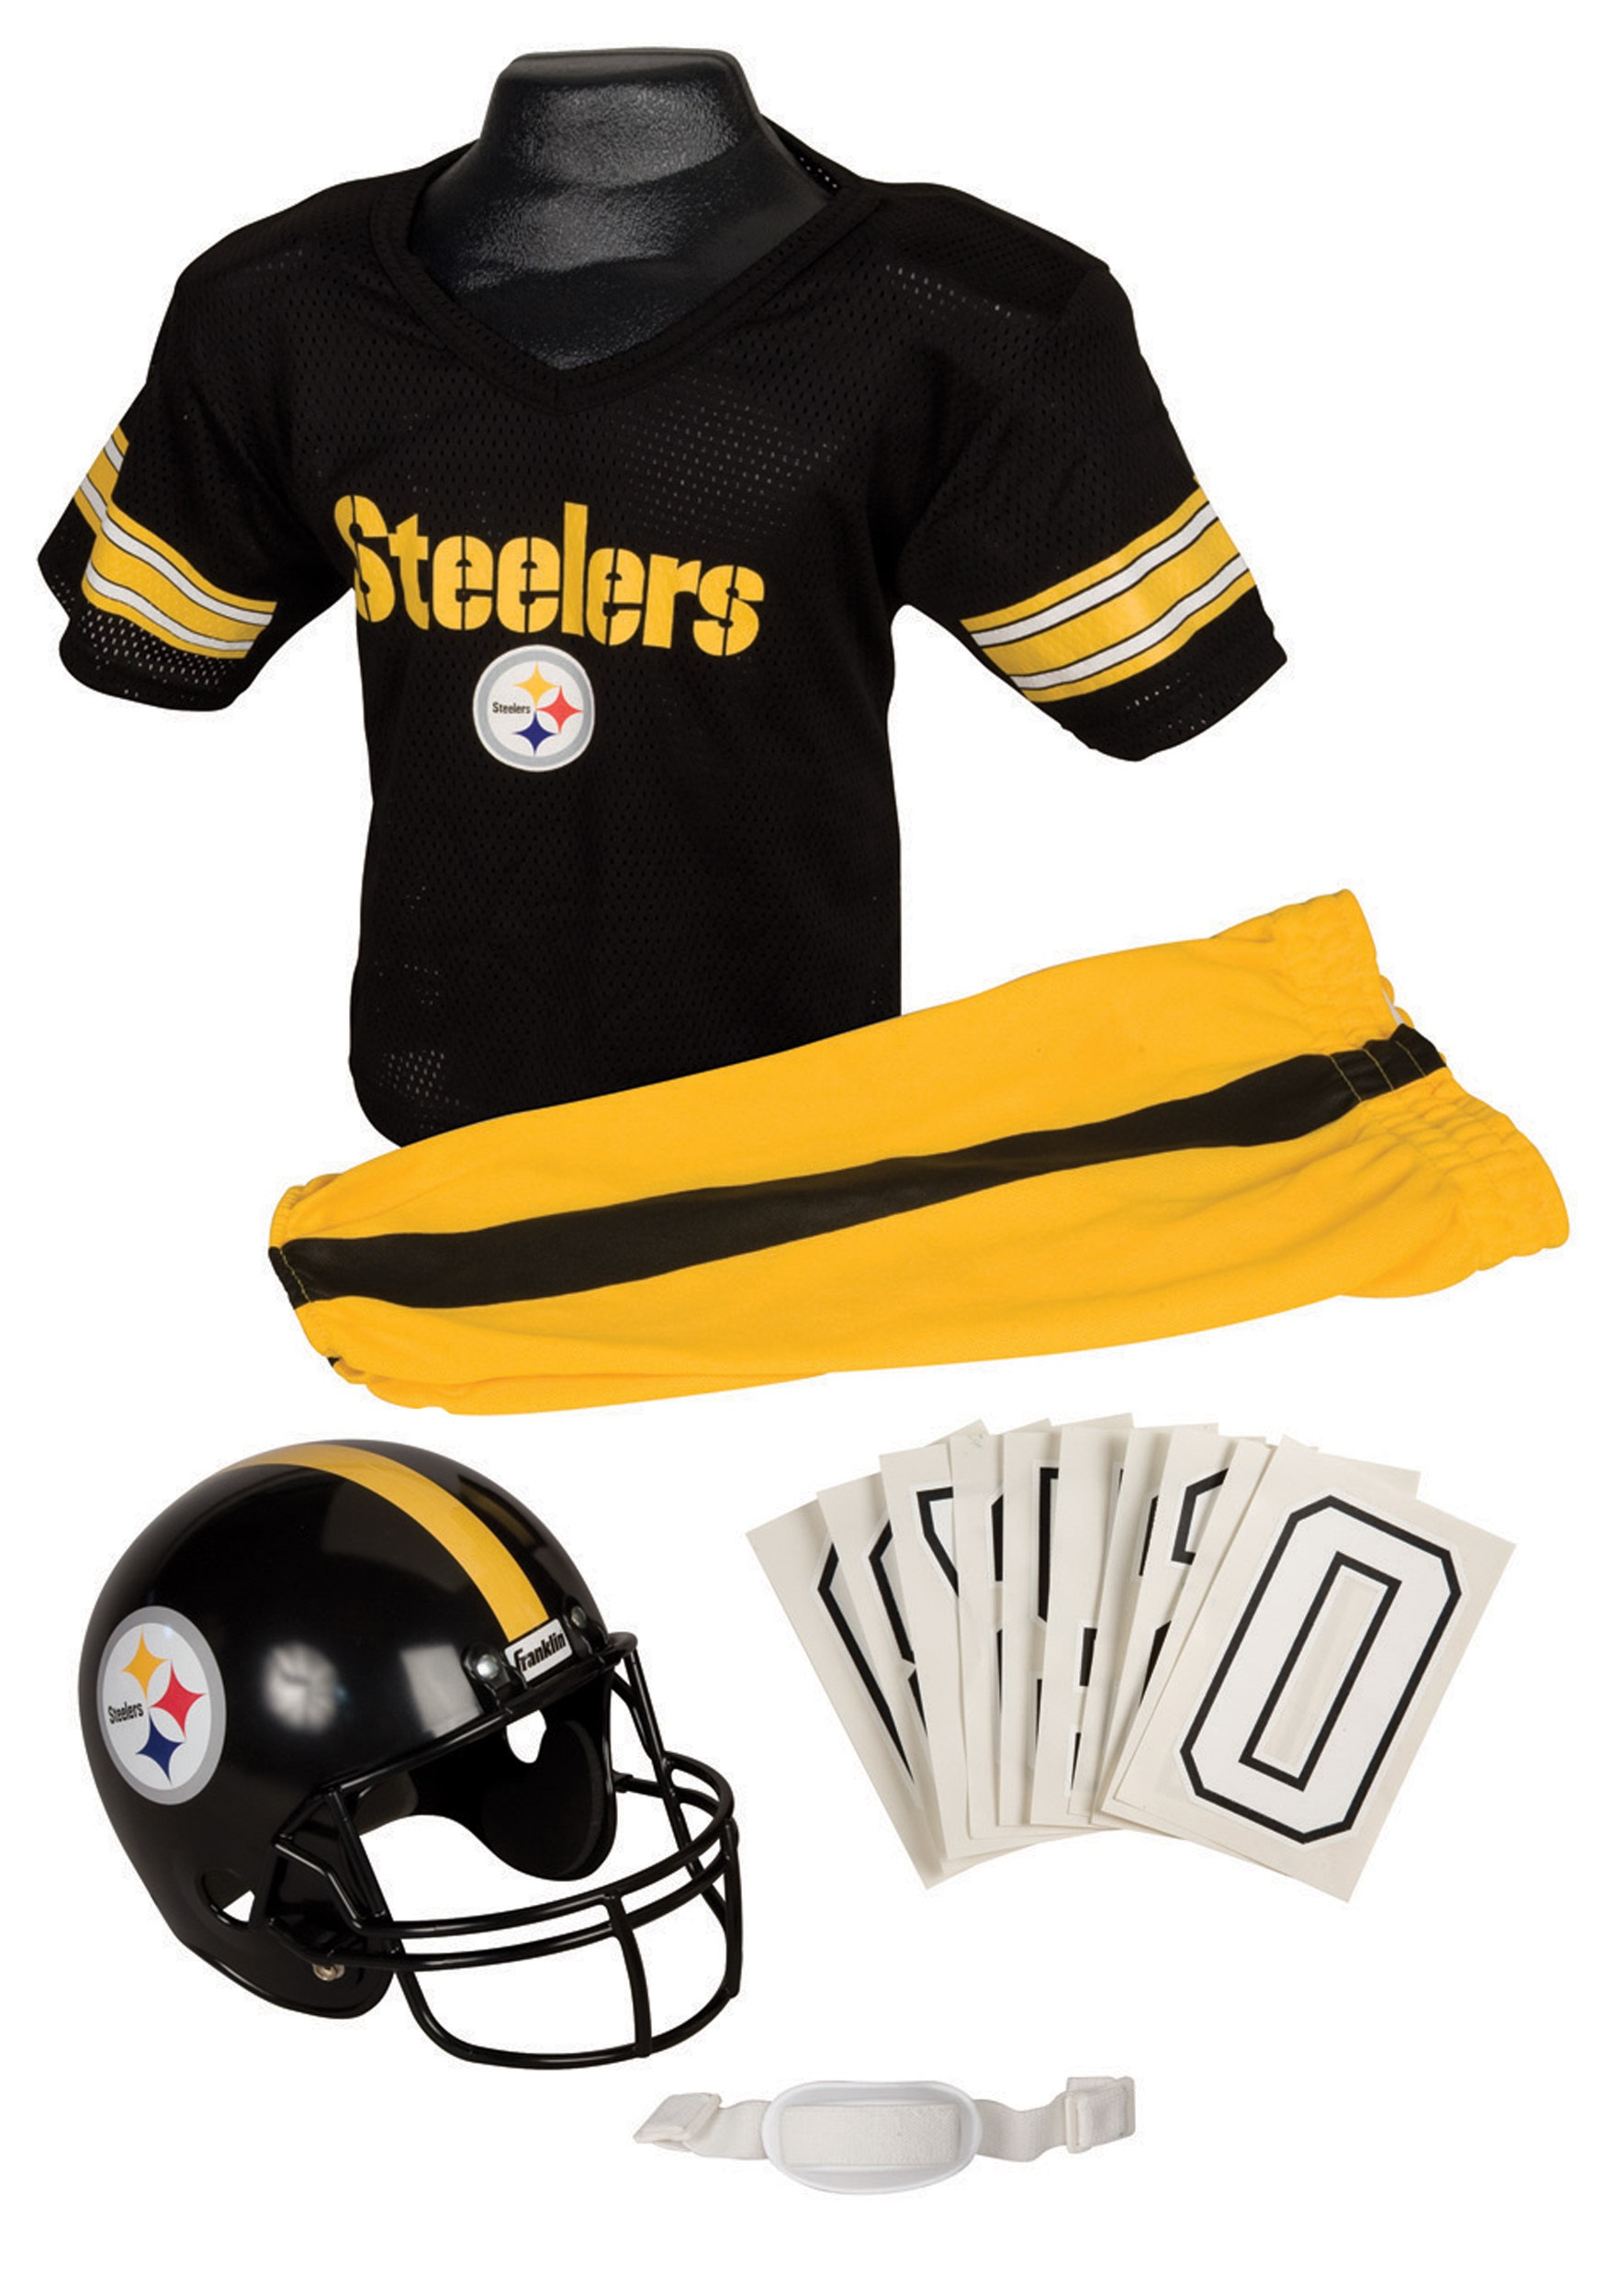 Franklin Pittsburgh Steelers NFL Youth Helmet and Uniform Set, S